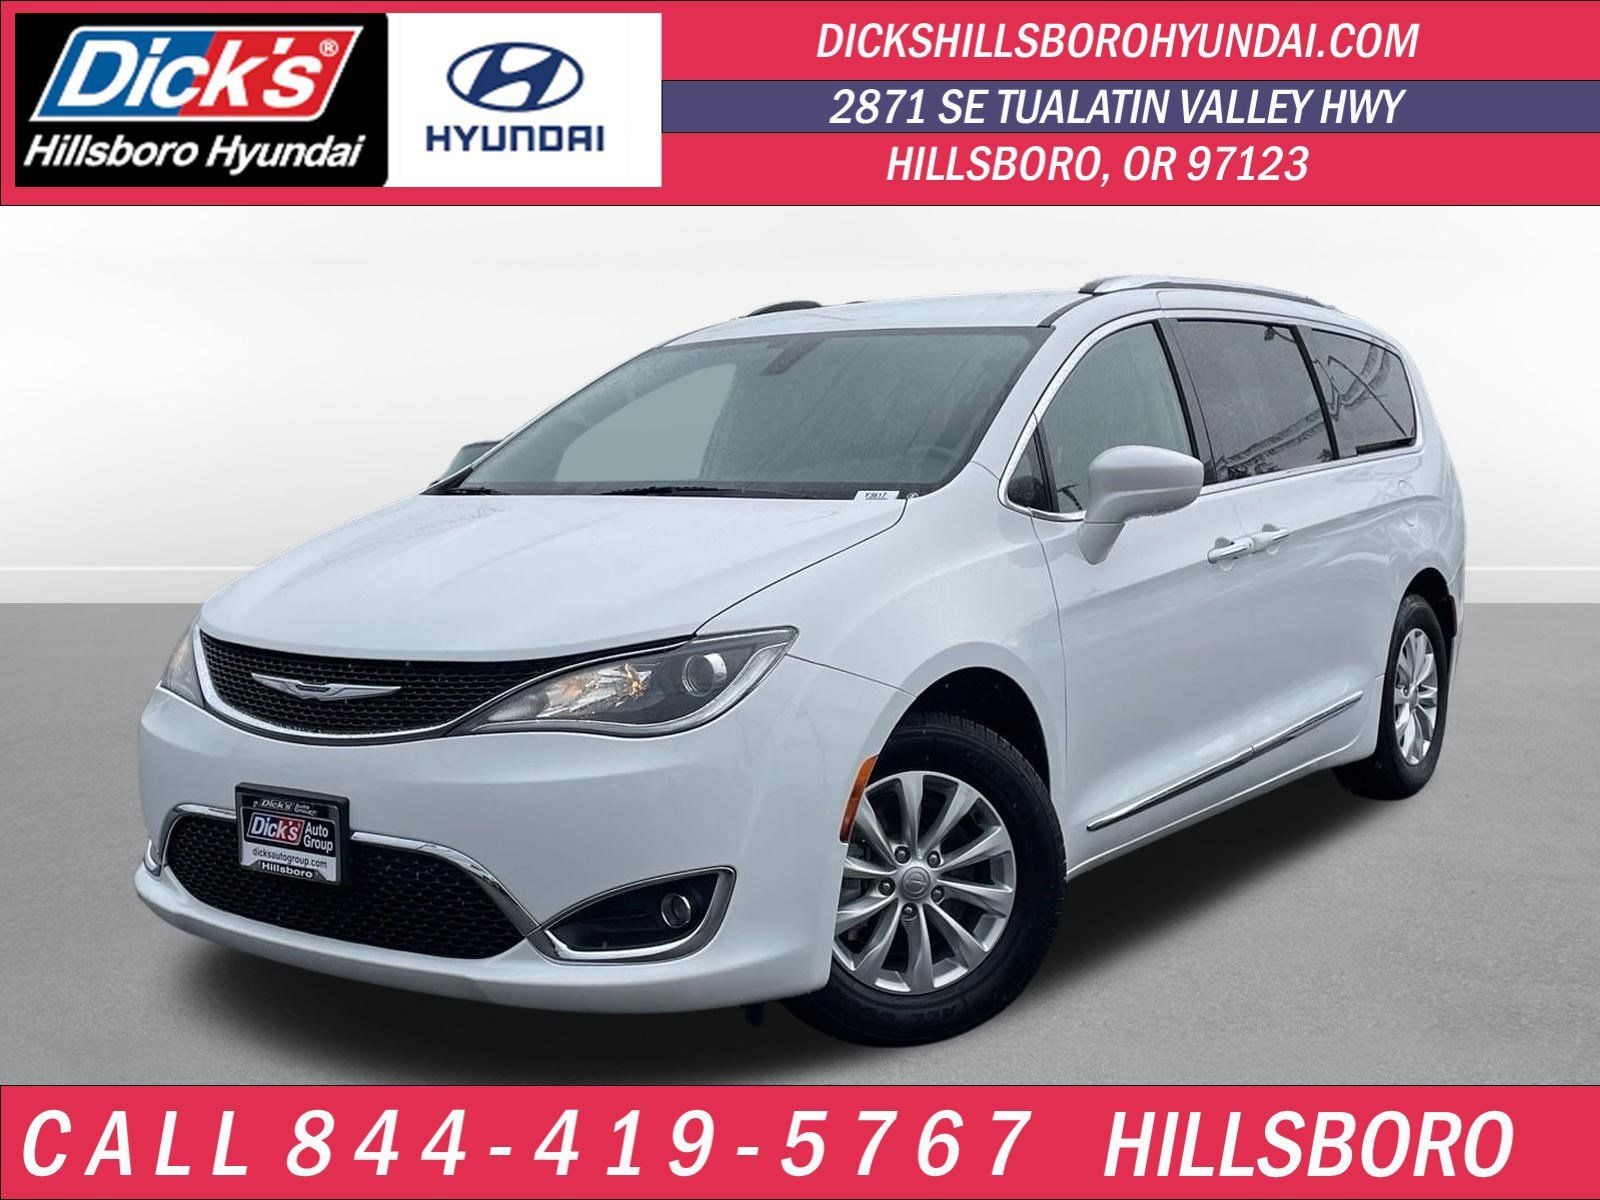 2019 Chrysler Pacifica - Pre-Owned 2019 Chrysler Pacifica Touring L - Used - VIN 000000000 - 76 Miles - Hillsboro, OR 97123, United States